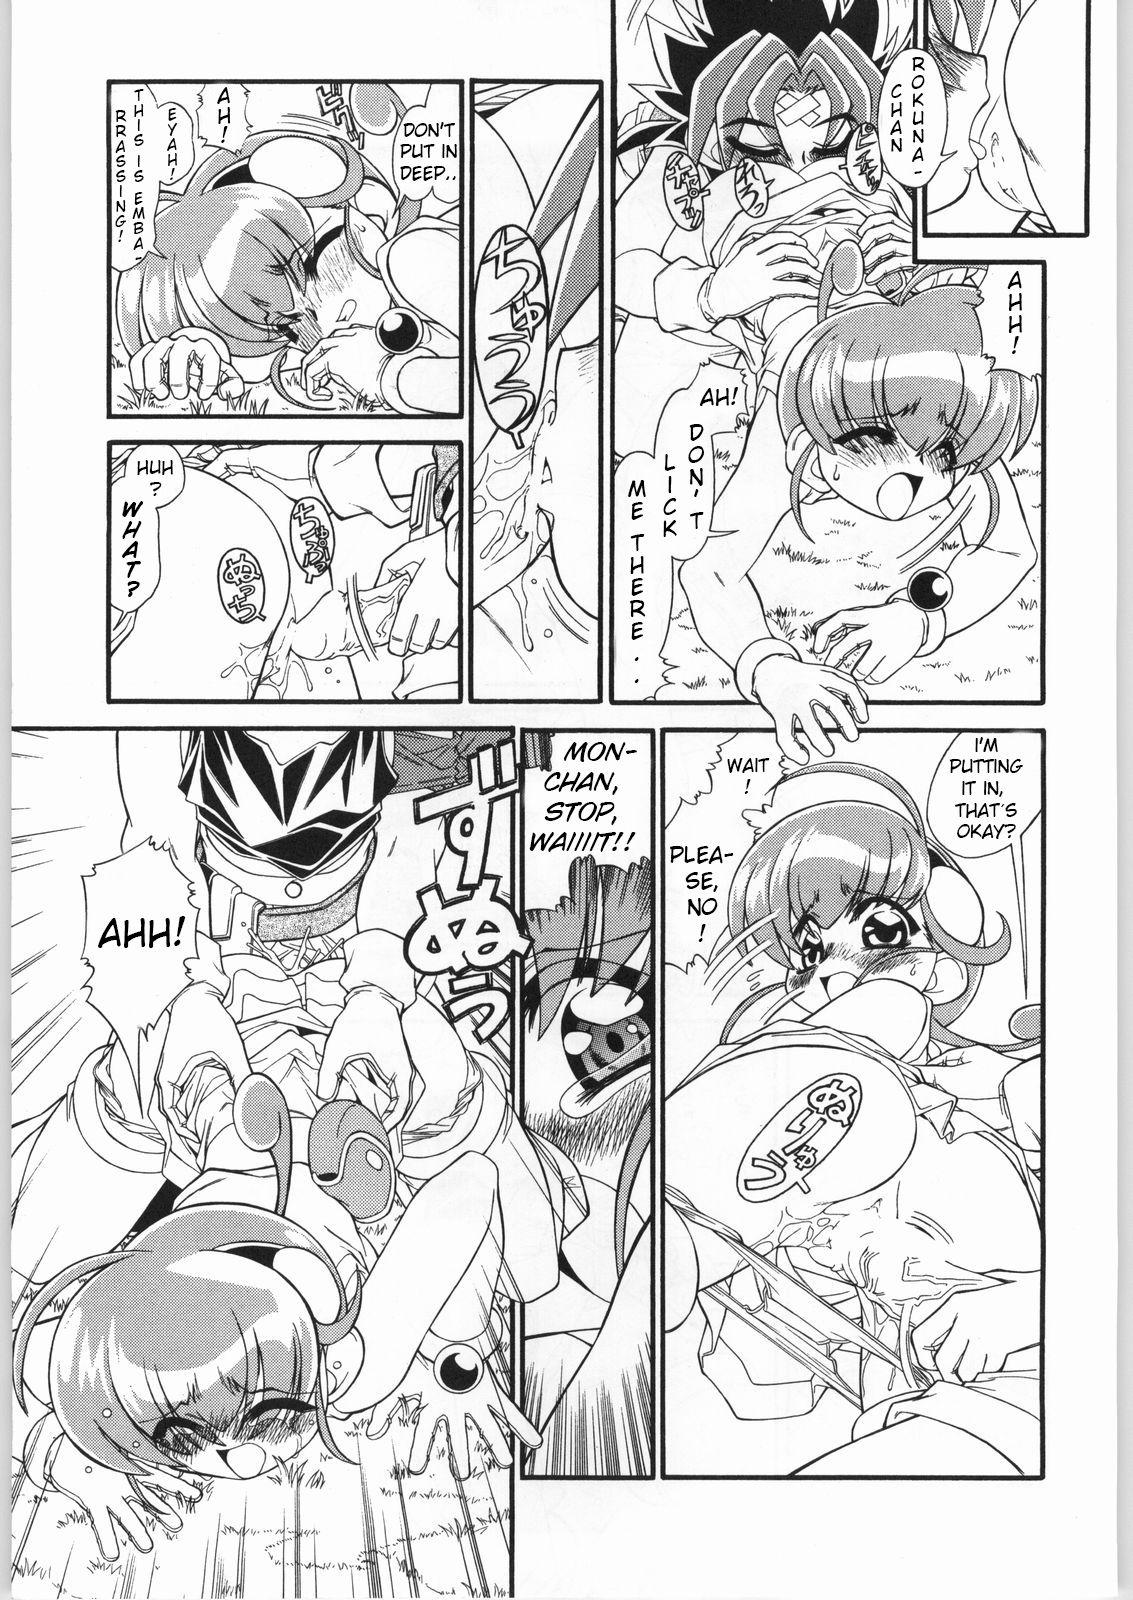 Rough Sex M.F.H.H.MN REVISE - Mon colle knights Soft - Page 4